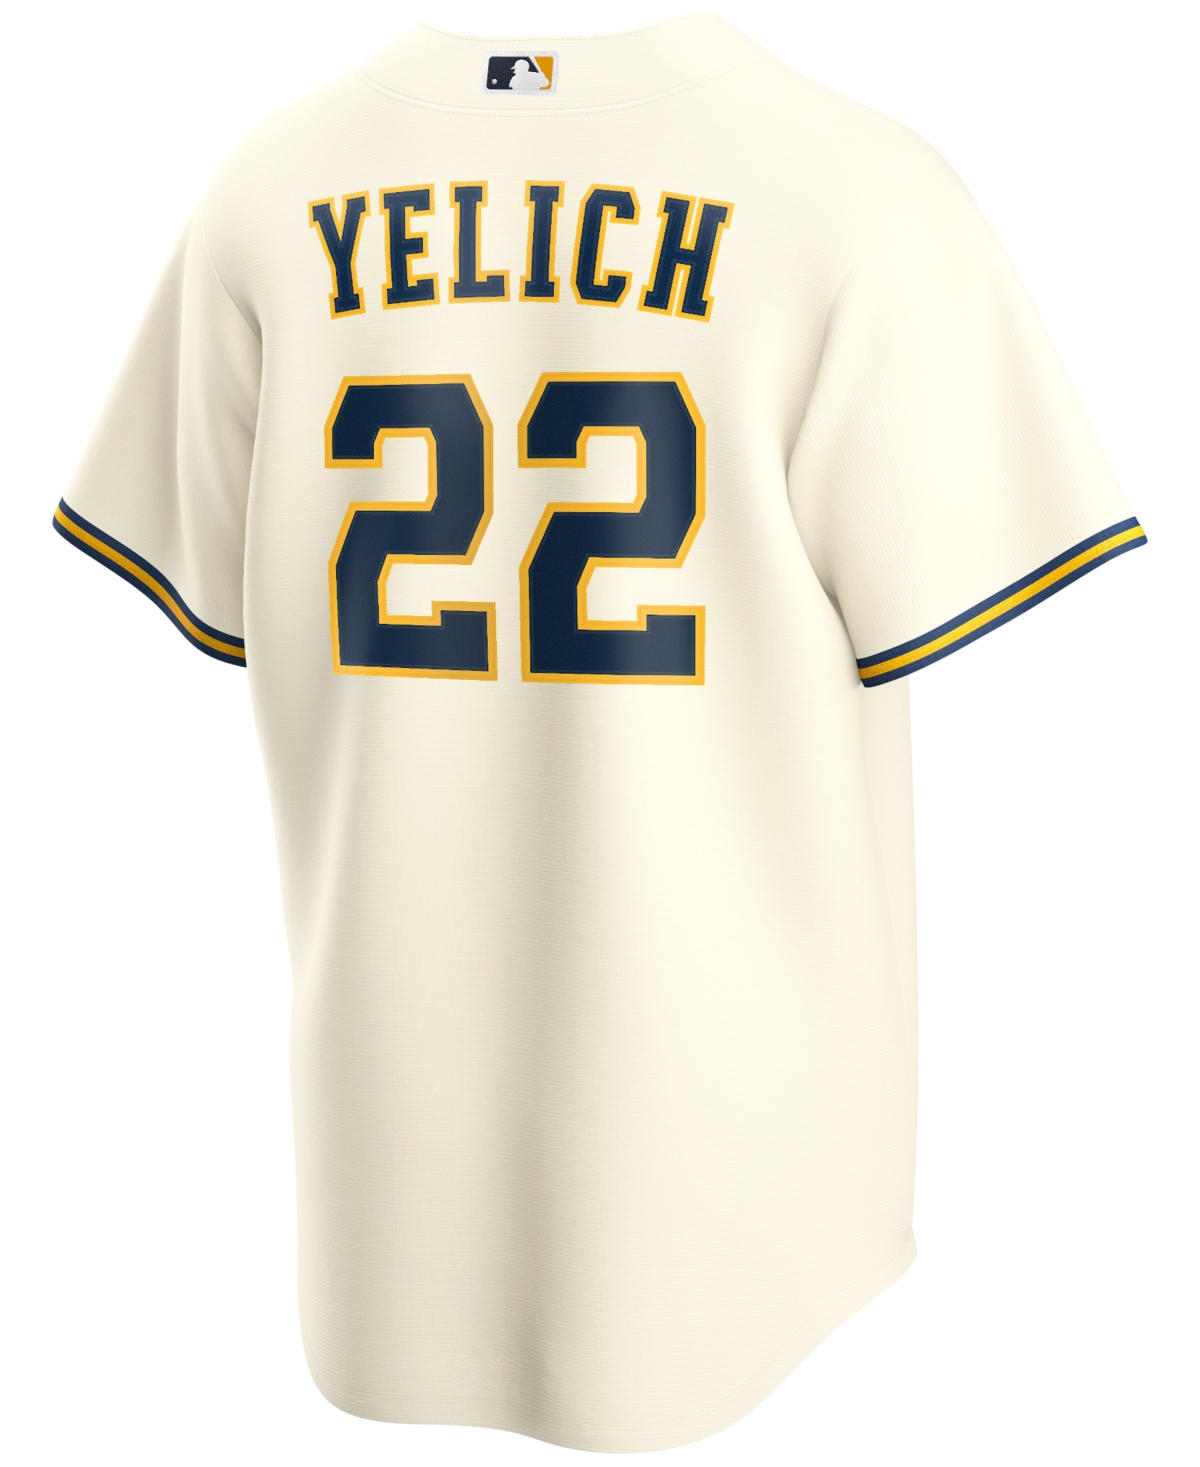 Nike Men's Christian Yelich Milwaukee Brewers Official Player Replica Jersey